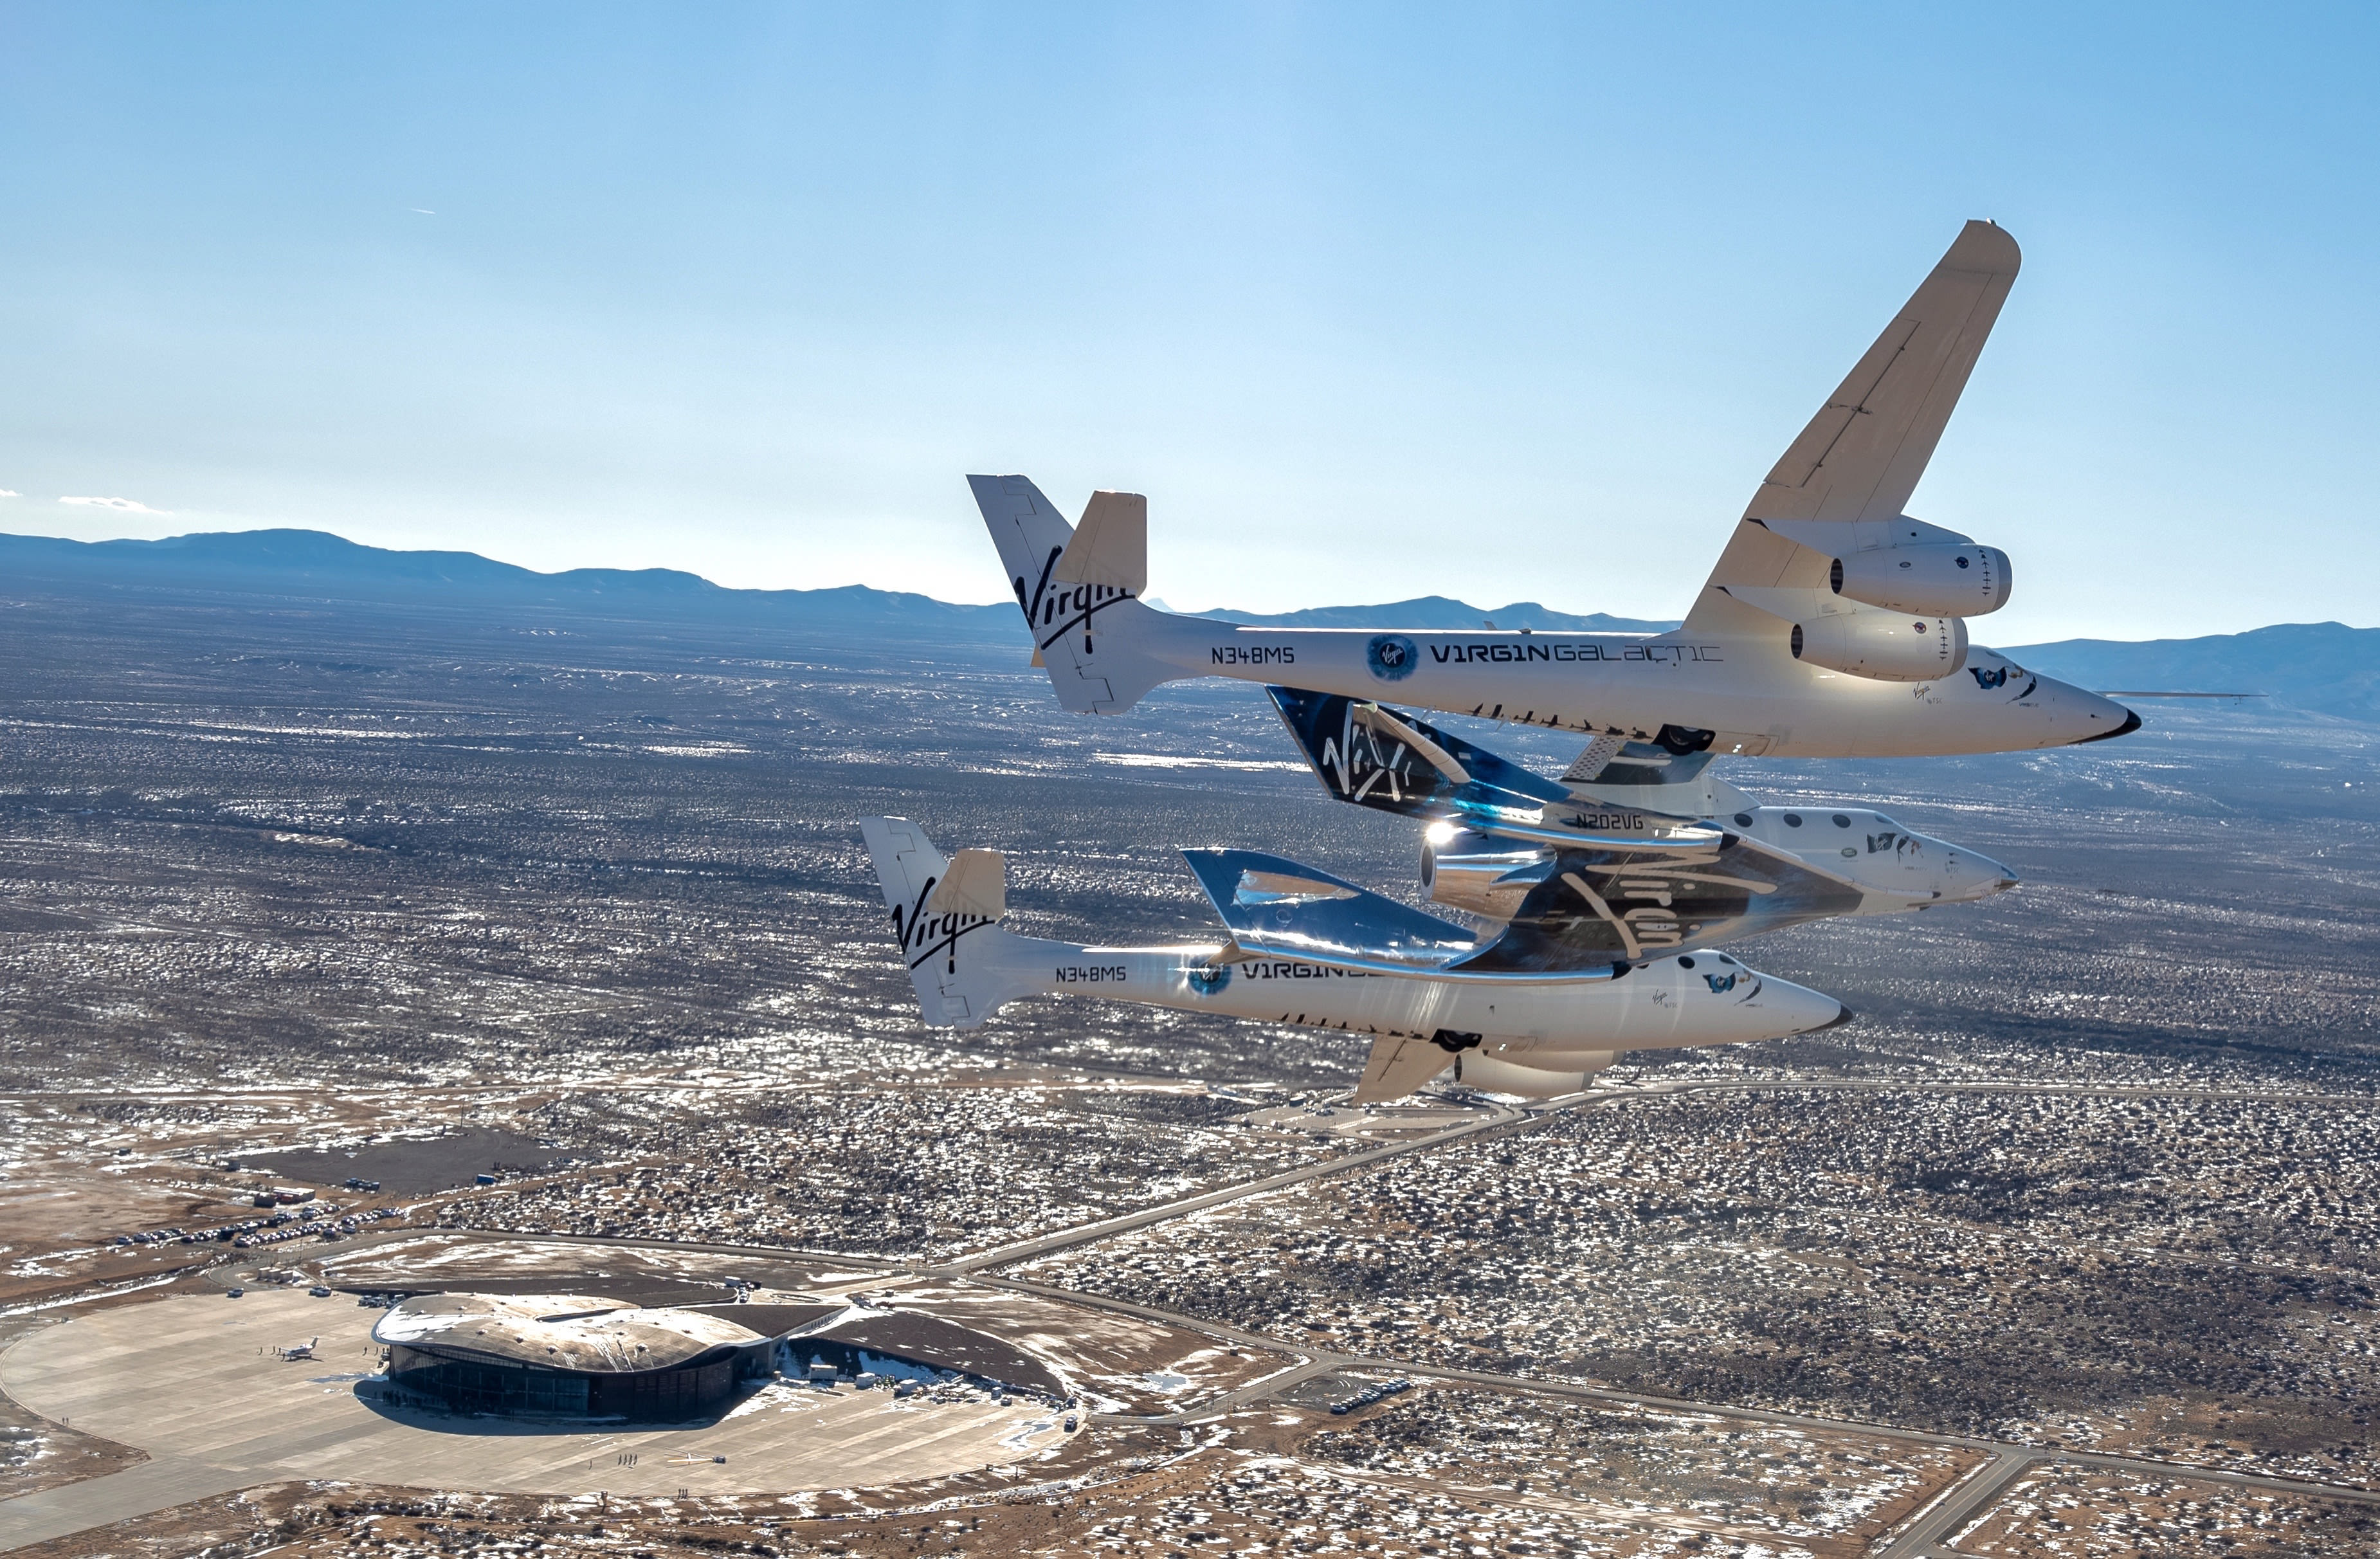 VMS Eve and VSS Unity fly into Spaceport America in New Mexico